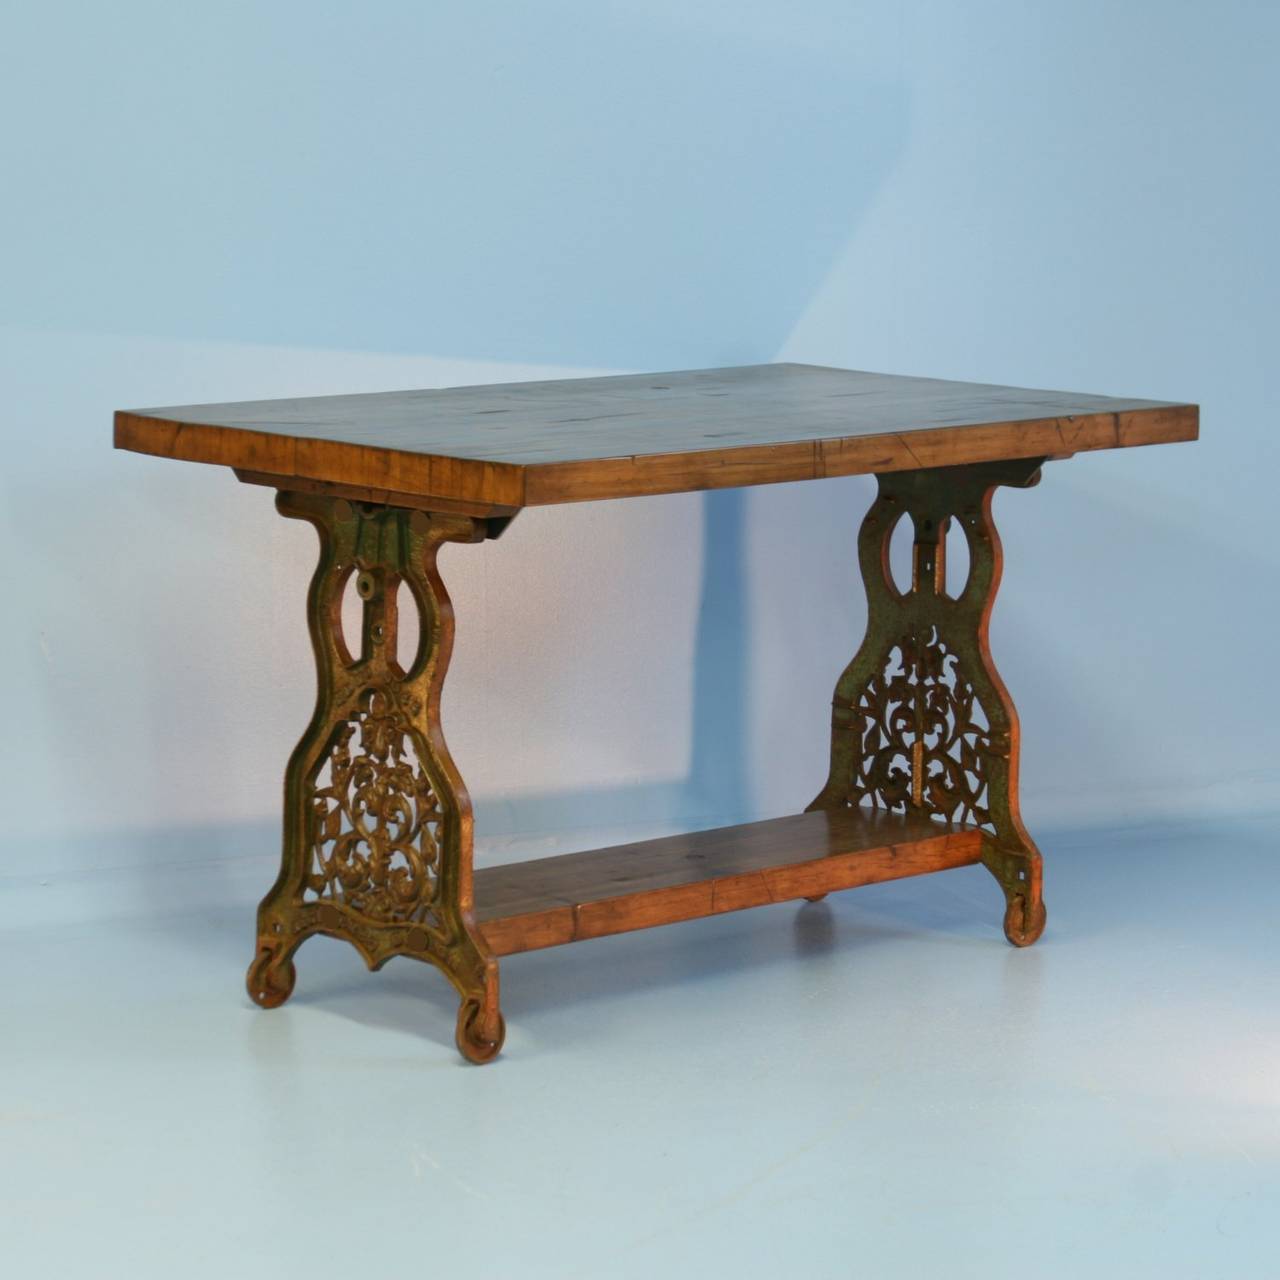 This incredible kitchen island is a one-of-a-kind find. The table top and foot rest are made from reclaimed railroad cart/boxcar wood from the 1920's. Note the rich patina and worn look of the heavy top. The iron base is also remarkable, made from